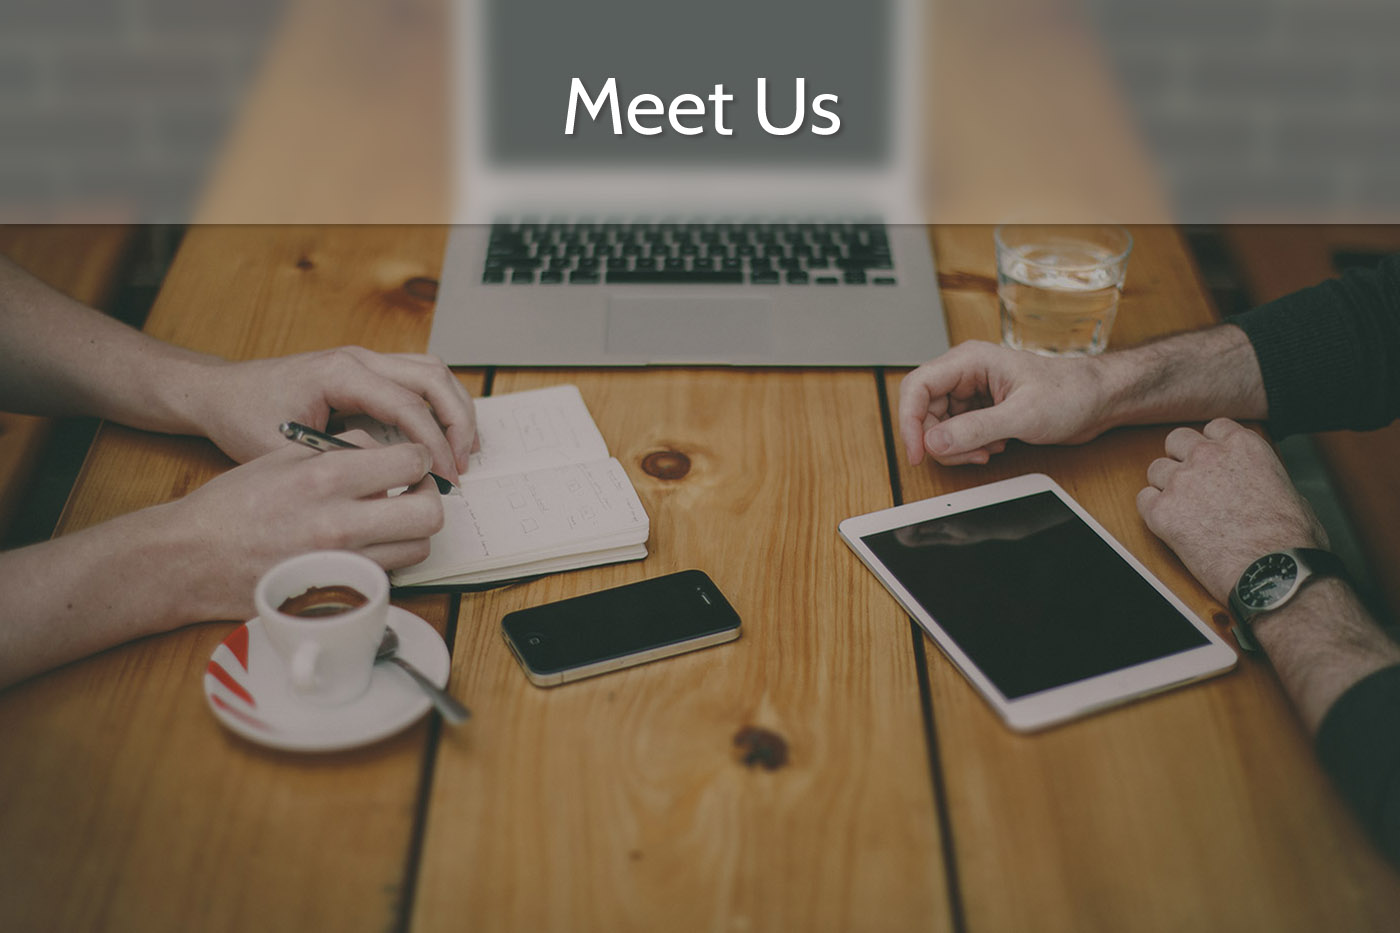 People meeting at desk, an illustration of a meeting with us at wooden desk(fullscreen image with coffee and laptop)